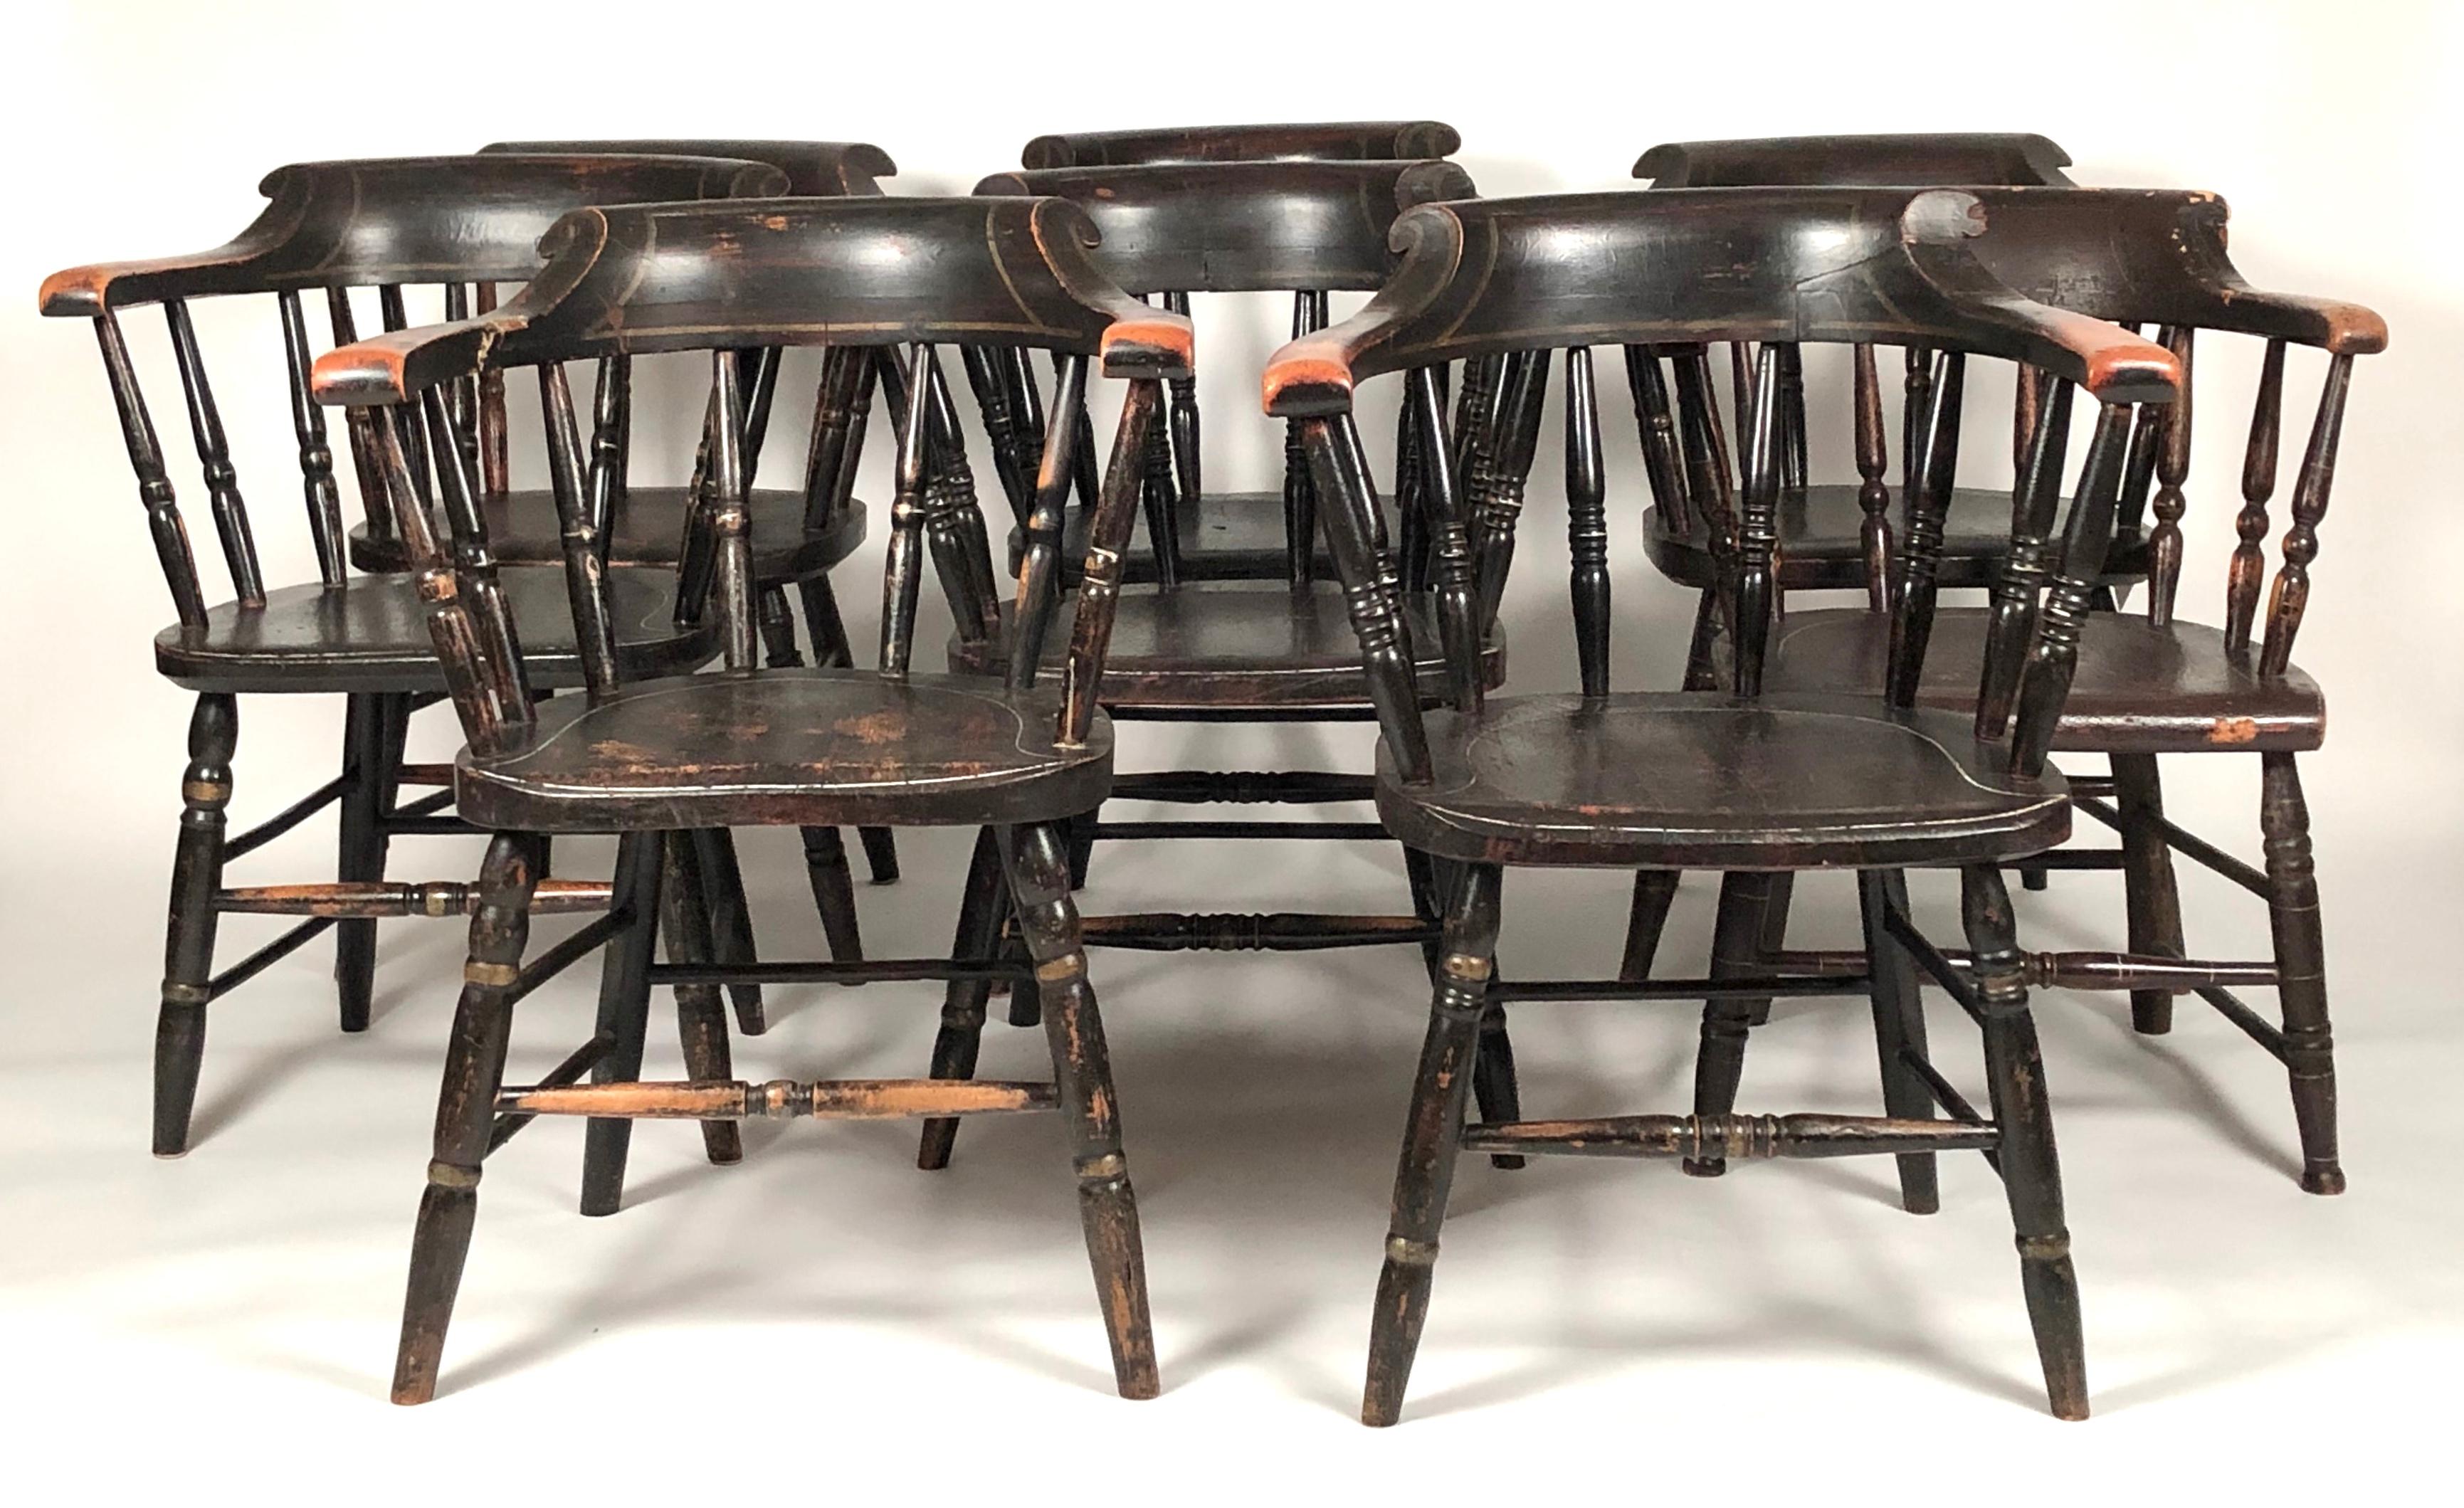 A hard to find matched set of 8 country captain's chairs in their old black paint with pinstripe decoration, each with a curved back supported by turned spindles over a shaped seat supported by turned legs joined by cross stretchers. 7 nearly